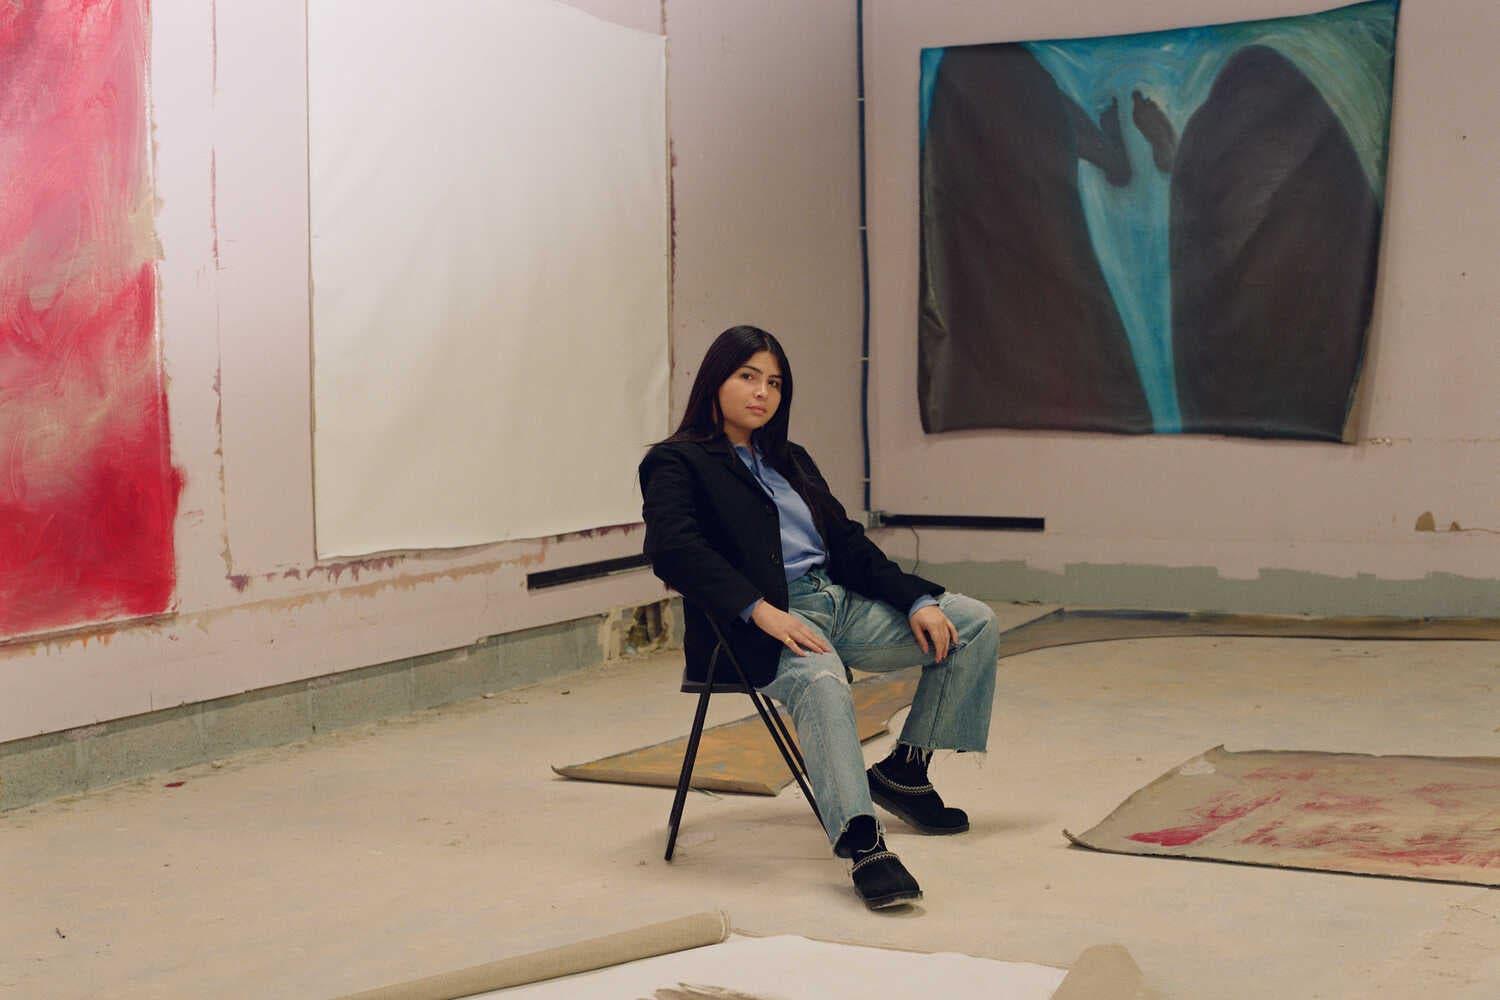 The artist and poet Ser Serpas, in jeans and a dark jacket, sits before her expressive new paintings, in red and blue, from her ongoing series depicting faceless torsos and abstract bodies. Some are self-portraits.